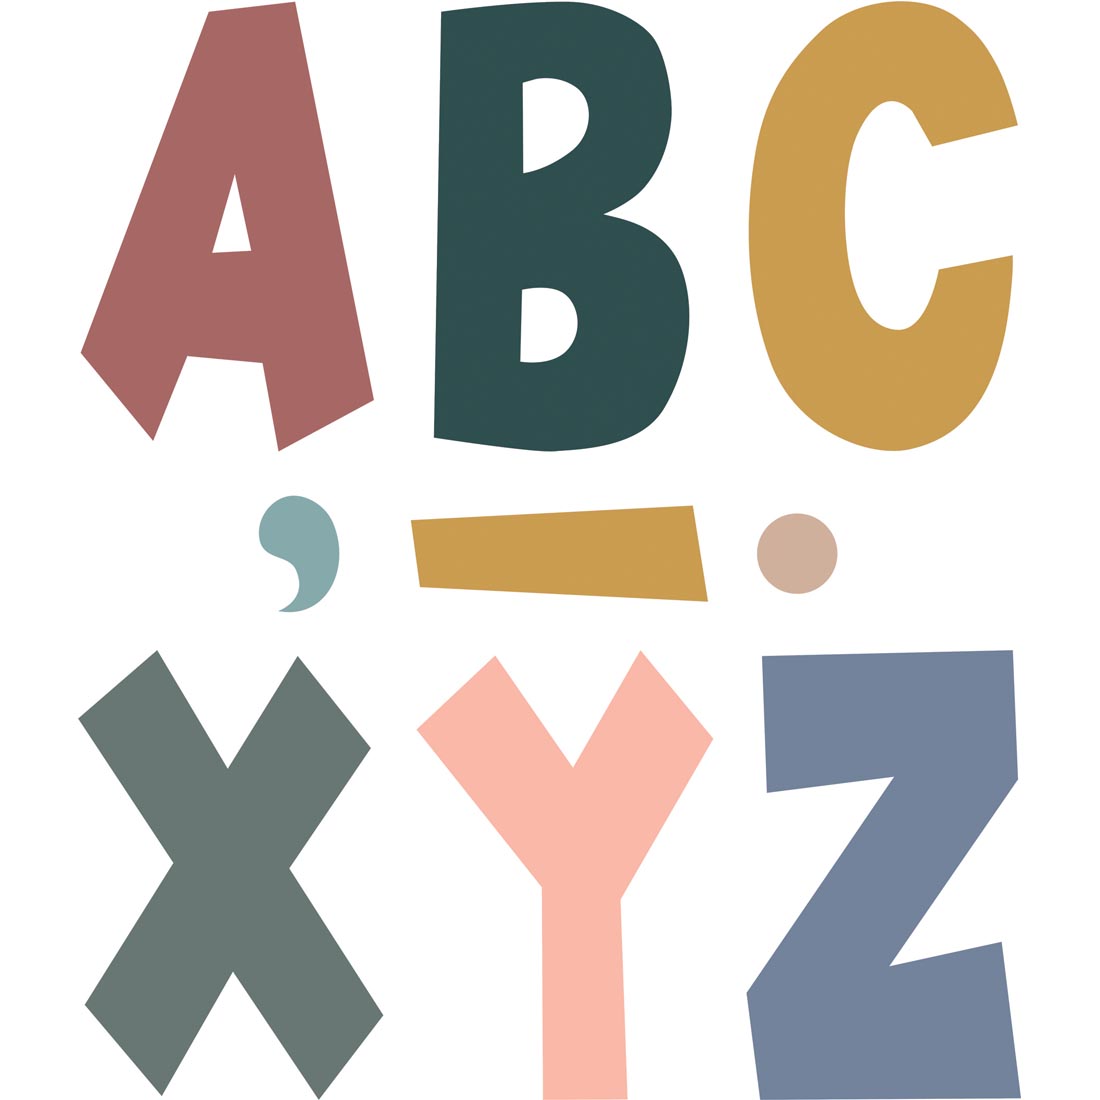 Fun Font 7" Letters from the Wonderfully Wild collection by Teacher Created Resources